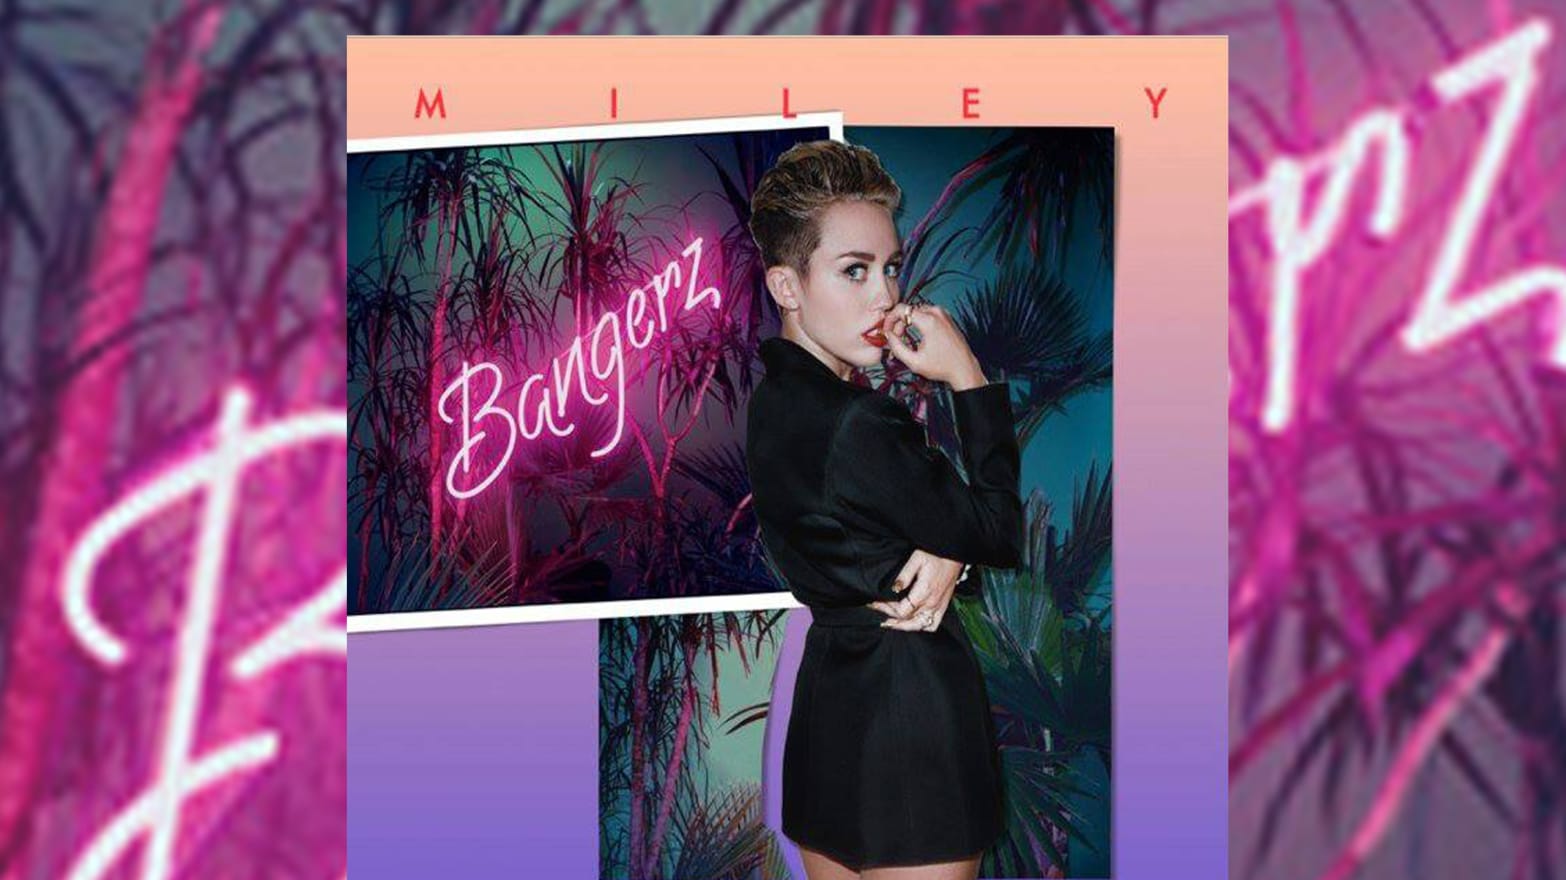 Miley Cyrus discography - Wikipedia